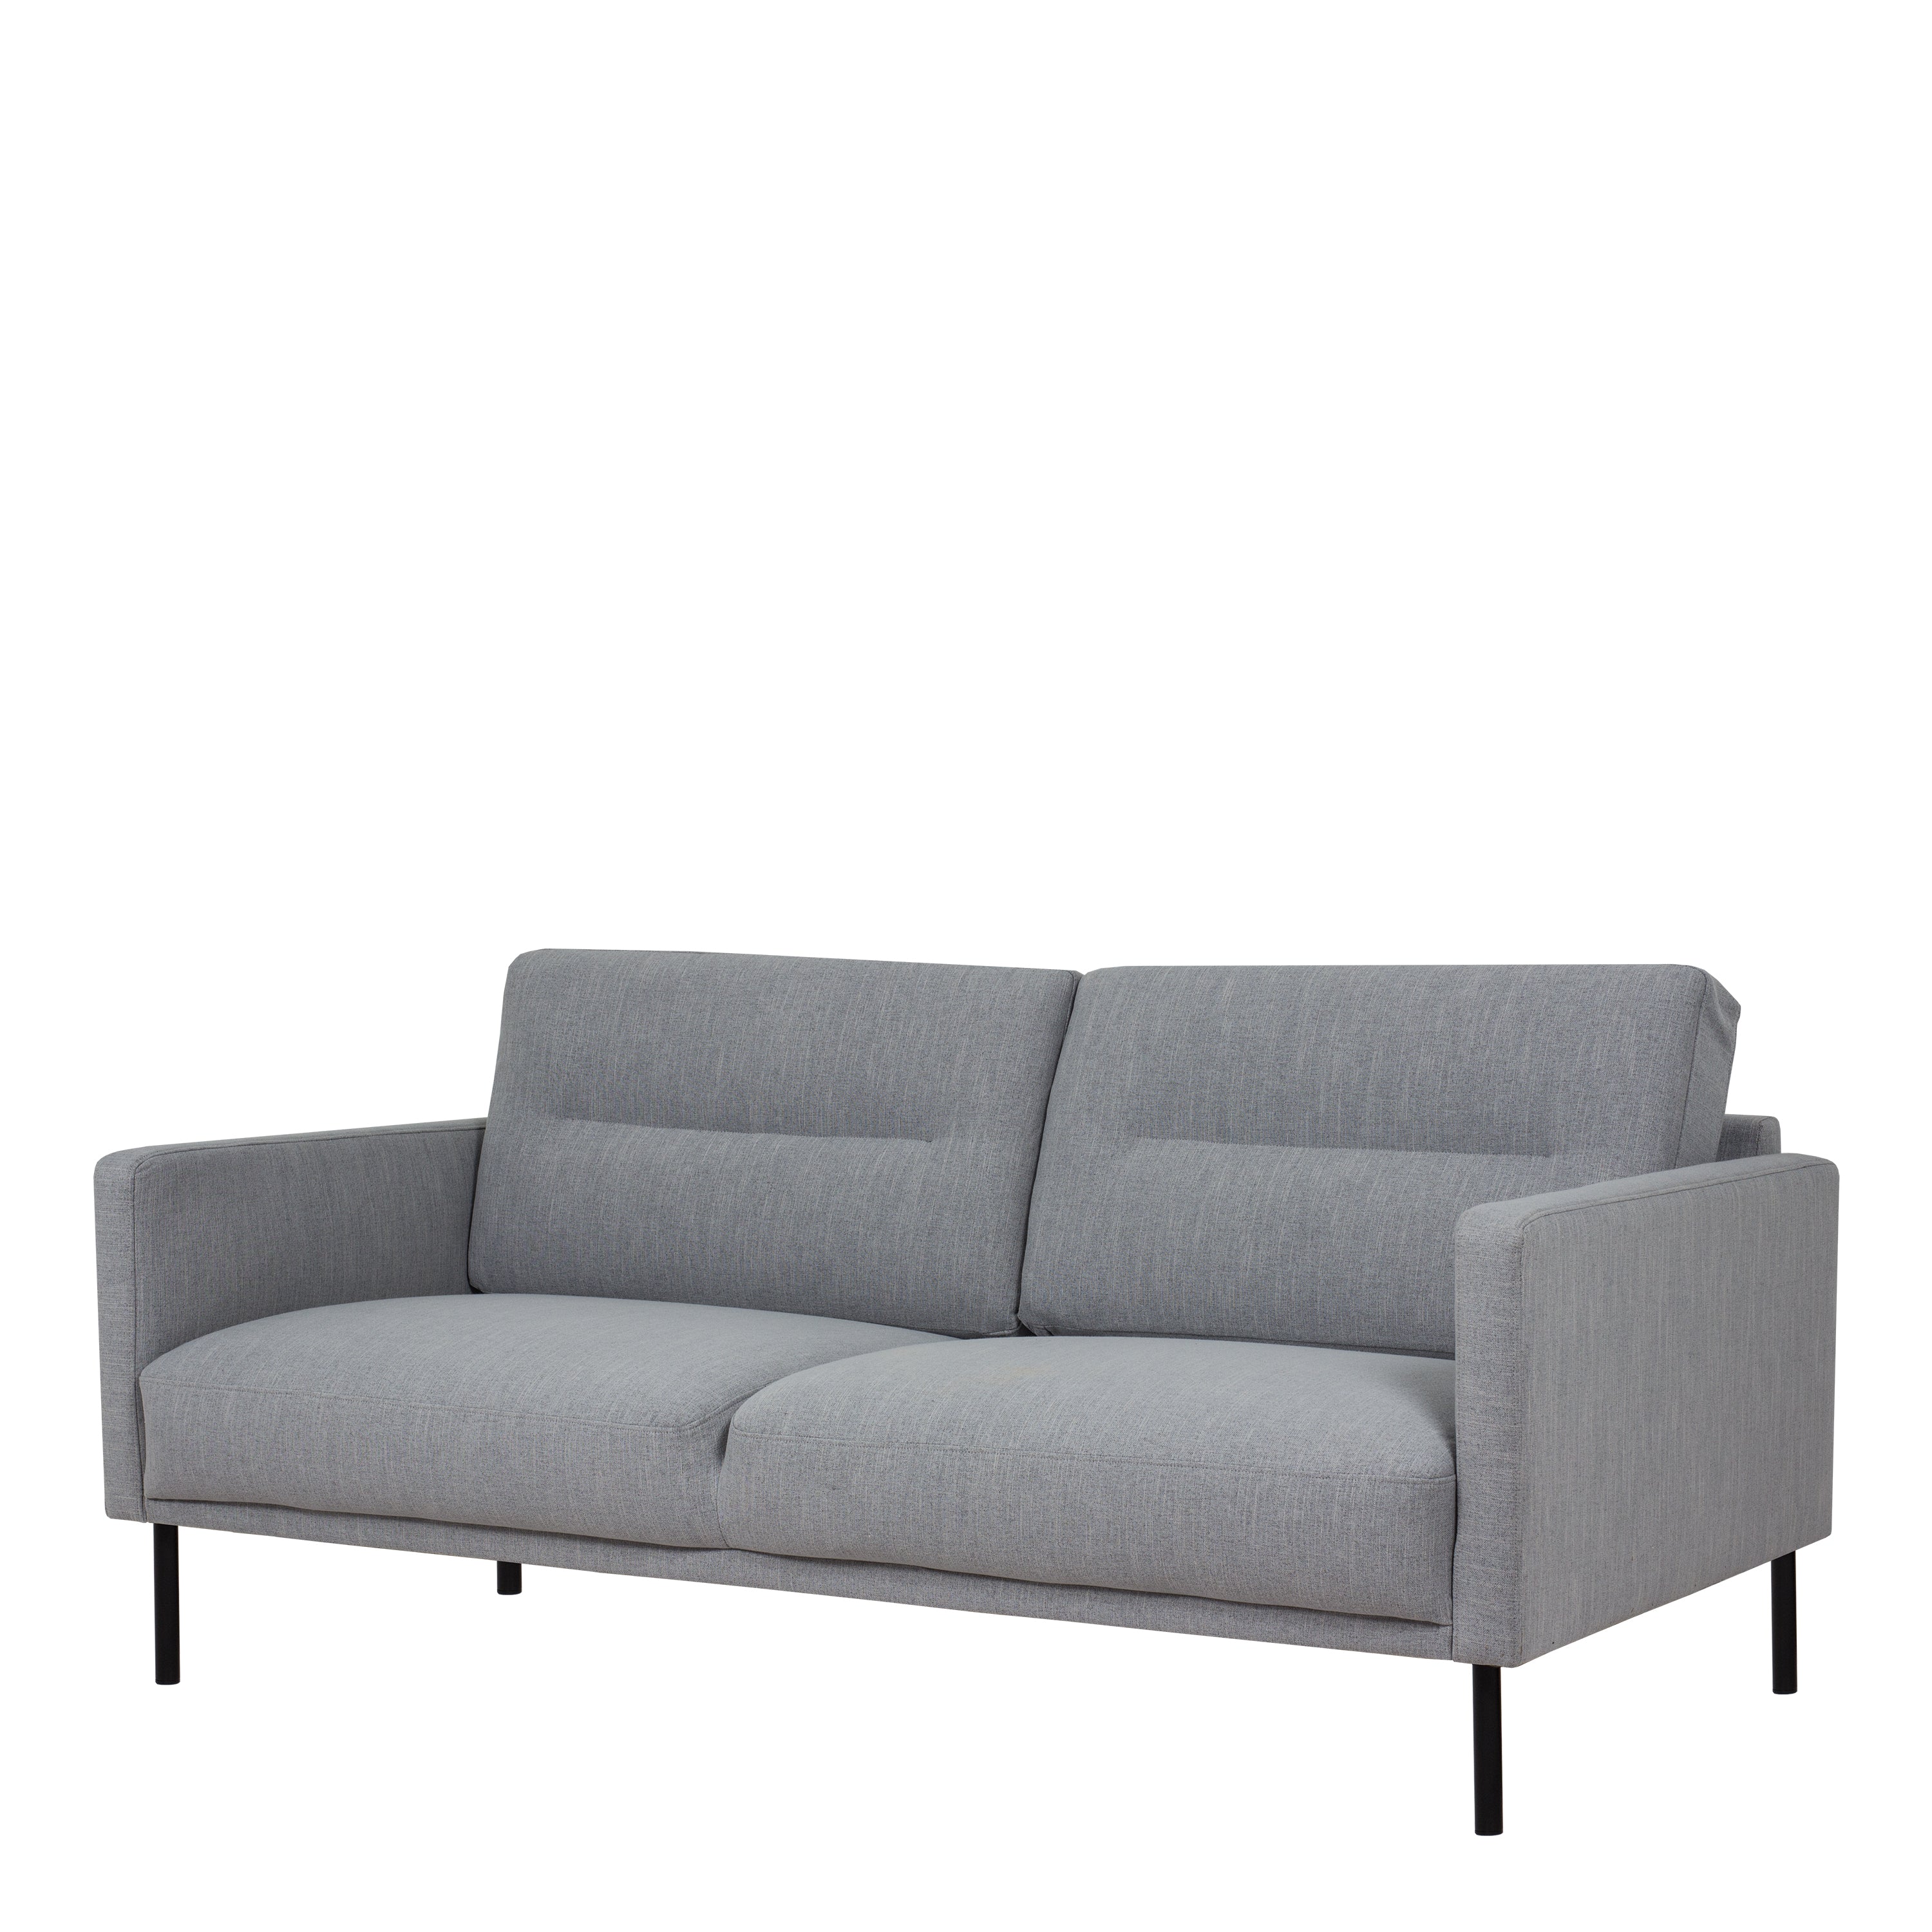 Furniture To Go Larvik 2.5 Seater Sofa (Black Legs) - Available In 3 Colours